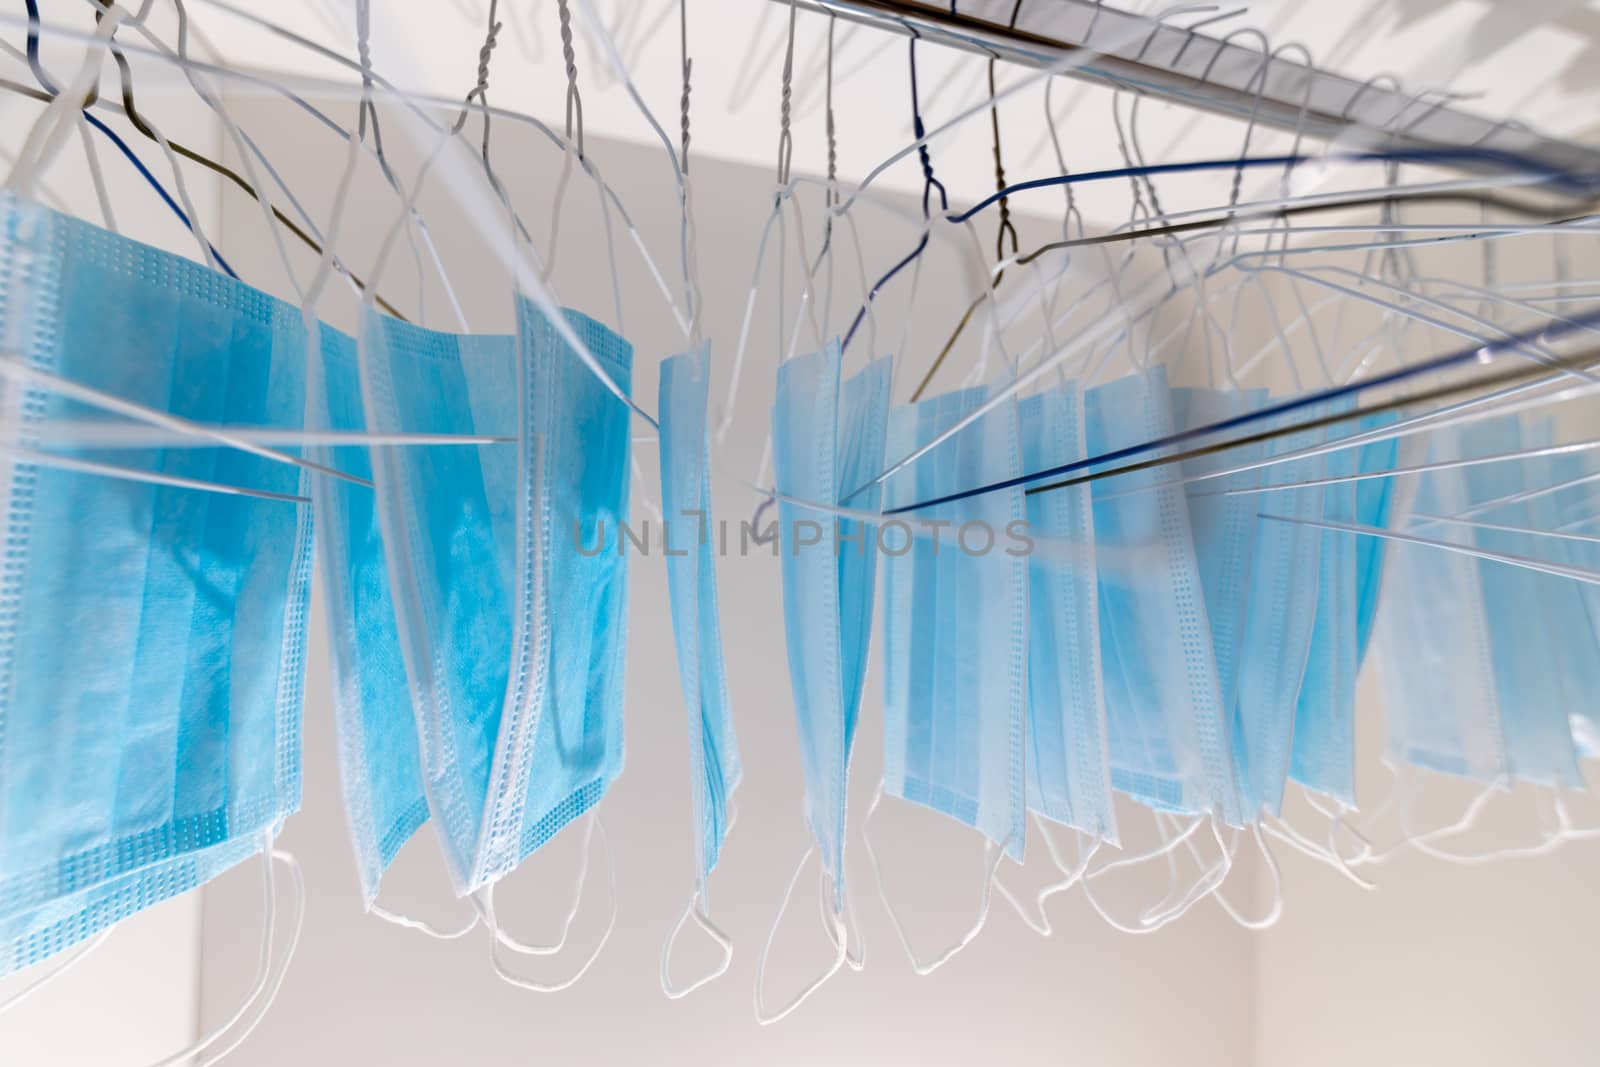 Disposable surgical masks hanging on hangers in a wardrobe closet. Concept of new normal. Concept of waring a mask becoming e new habit. Concept of adaptation during crisis and pandemic due to Covid. by dugulan